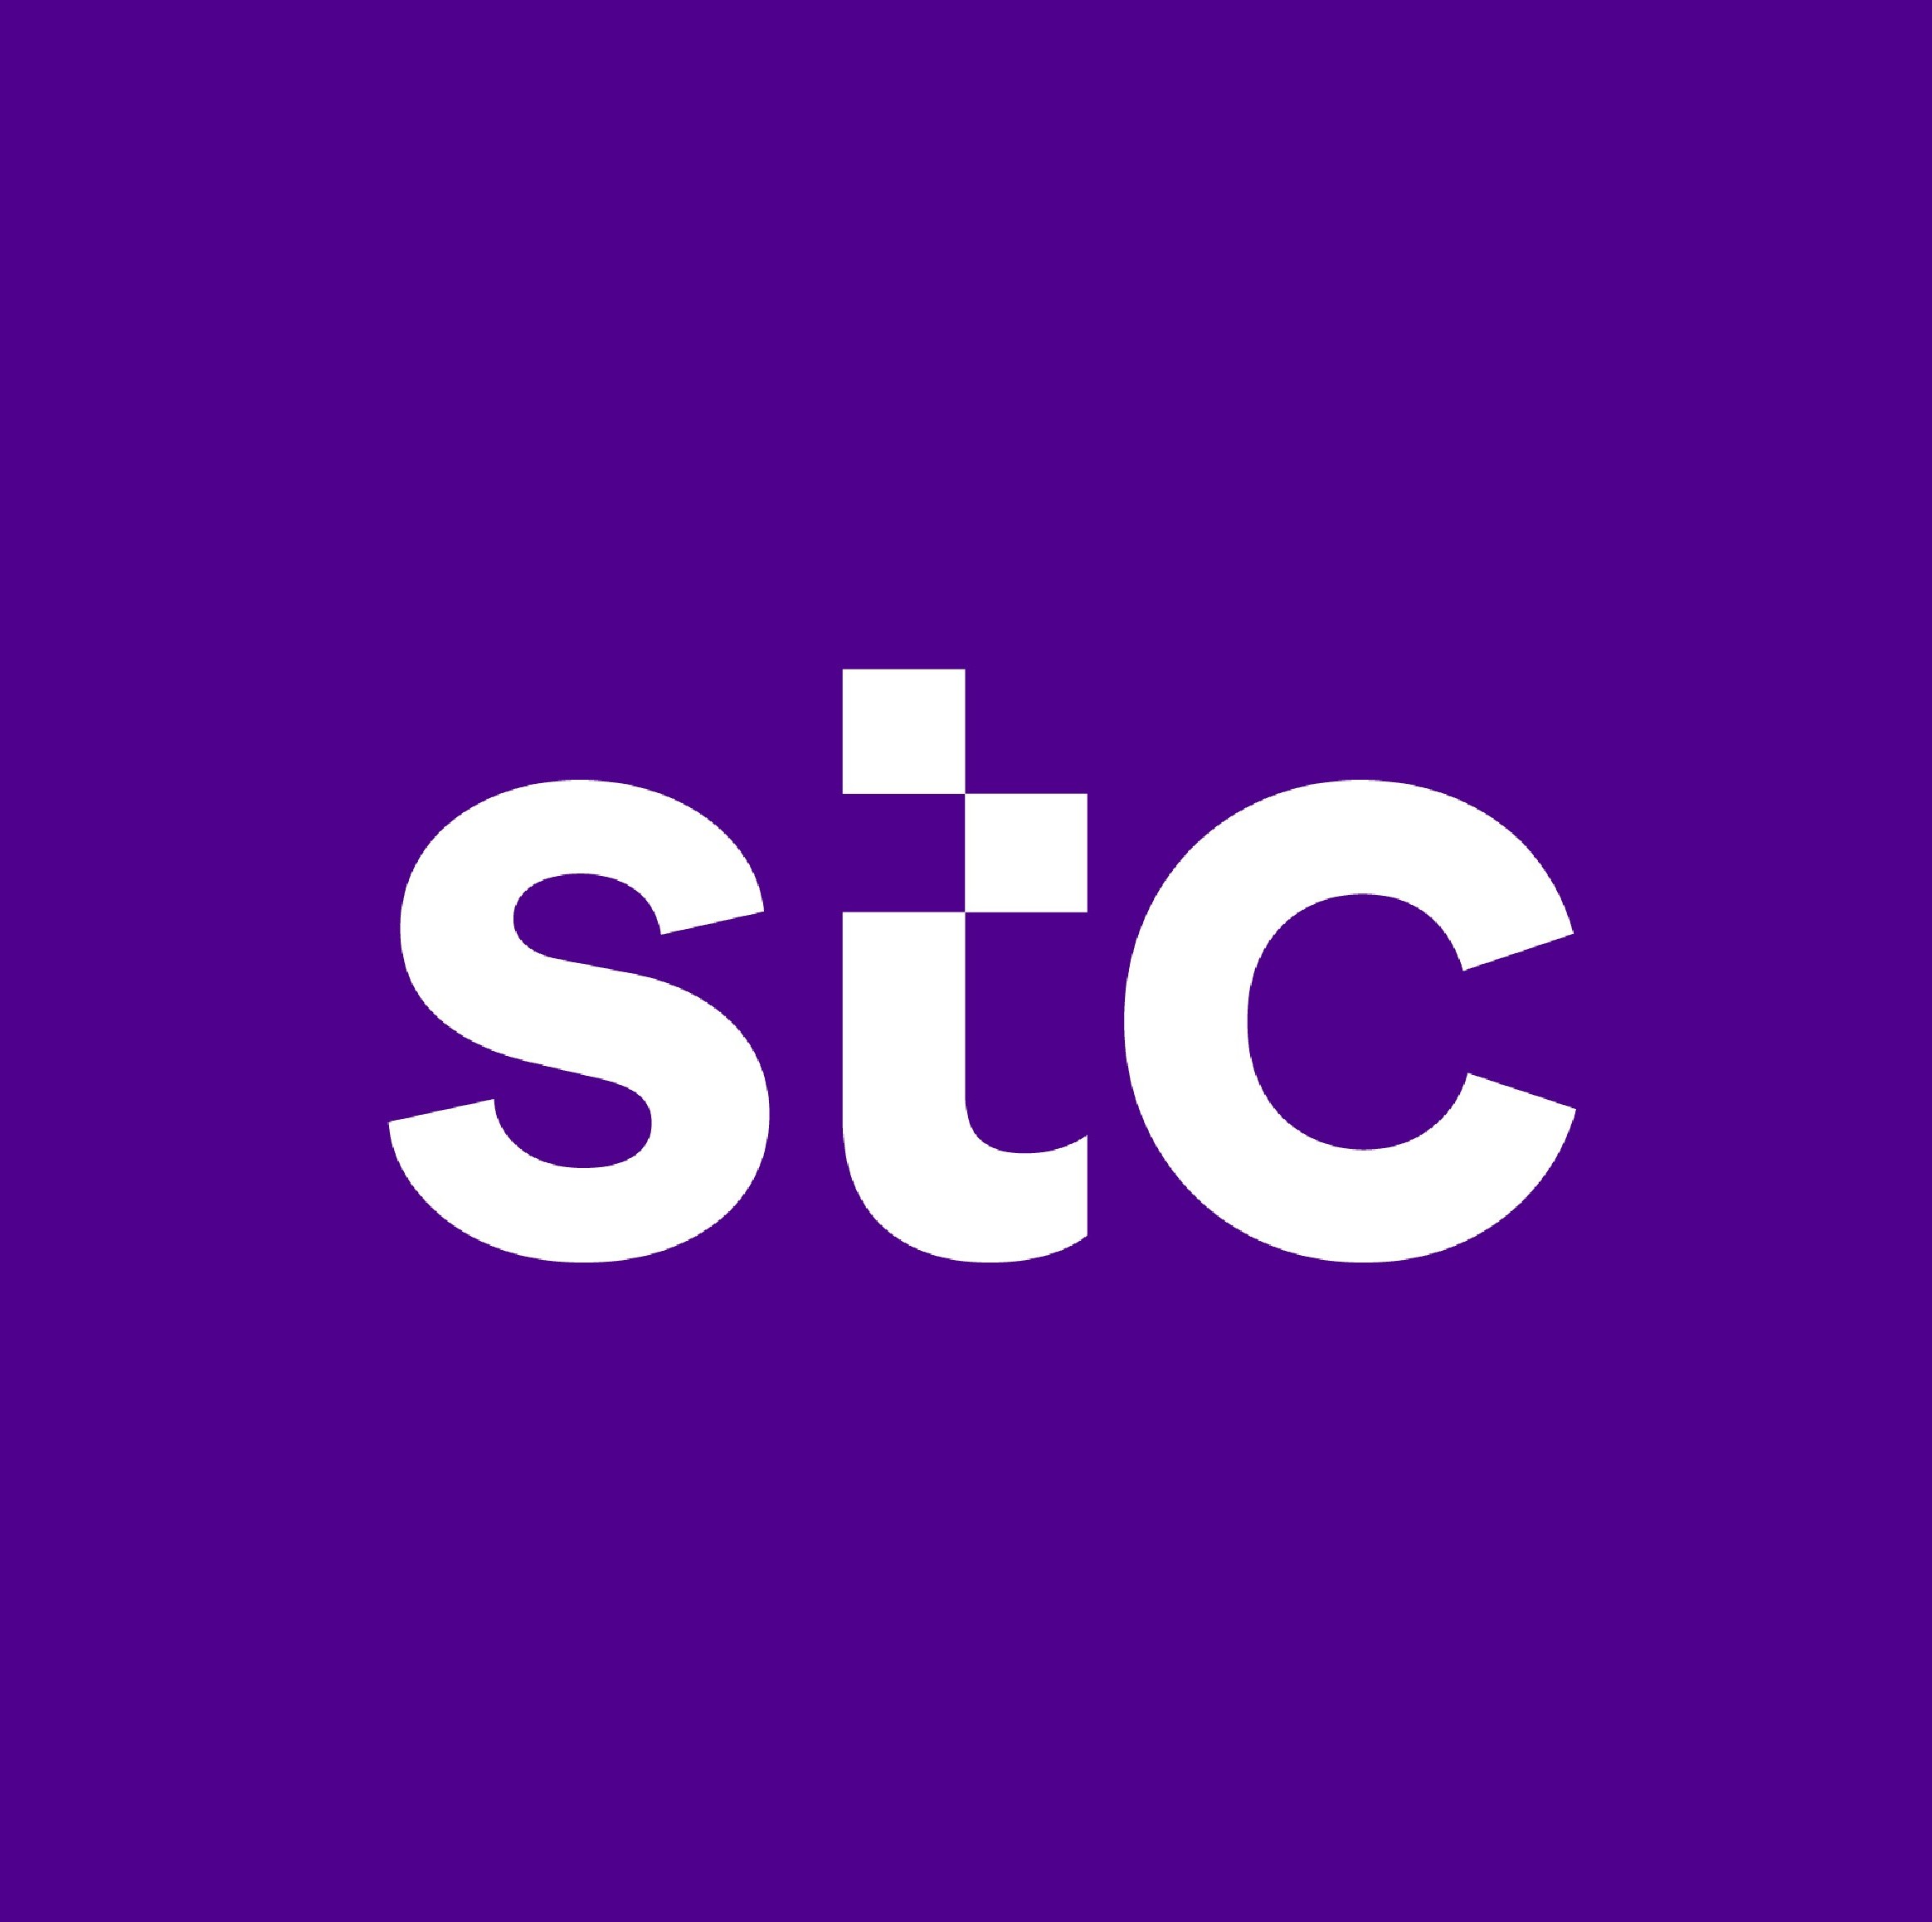 stc & Oracle announce business partnership image